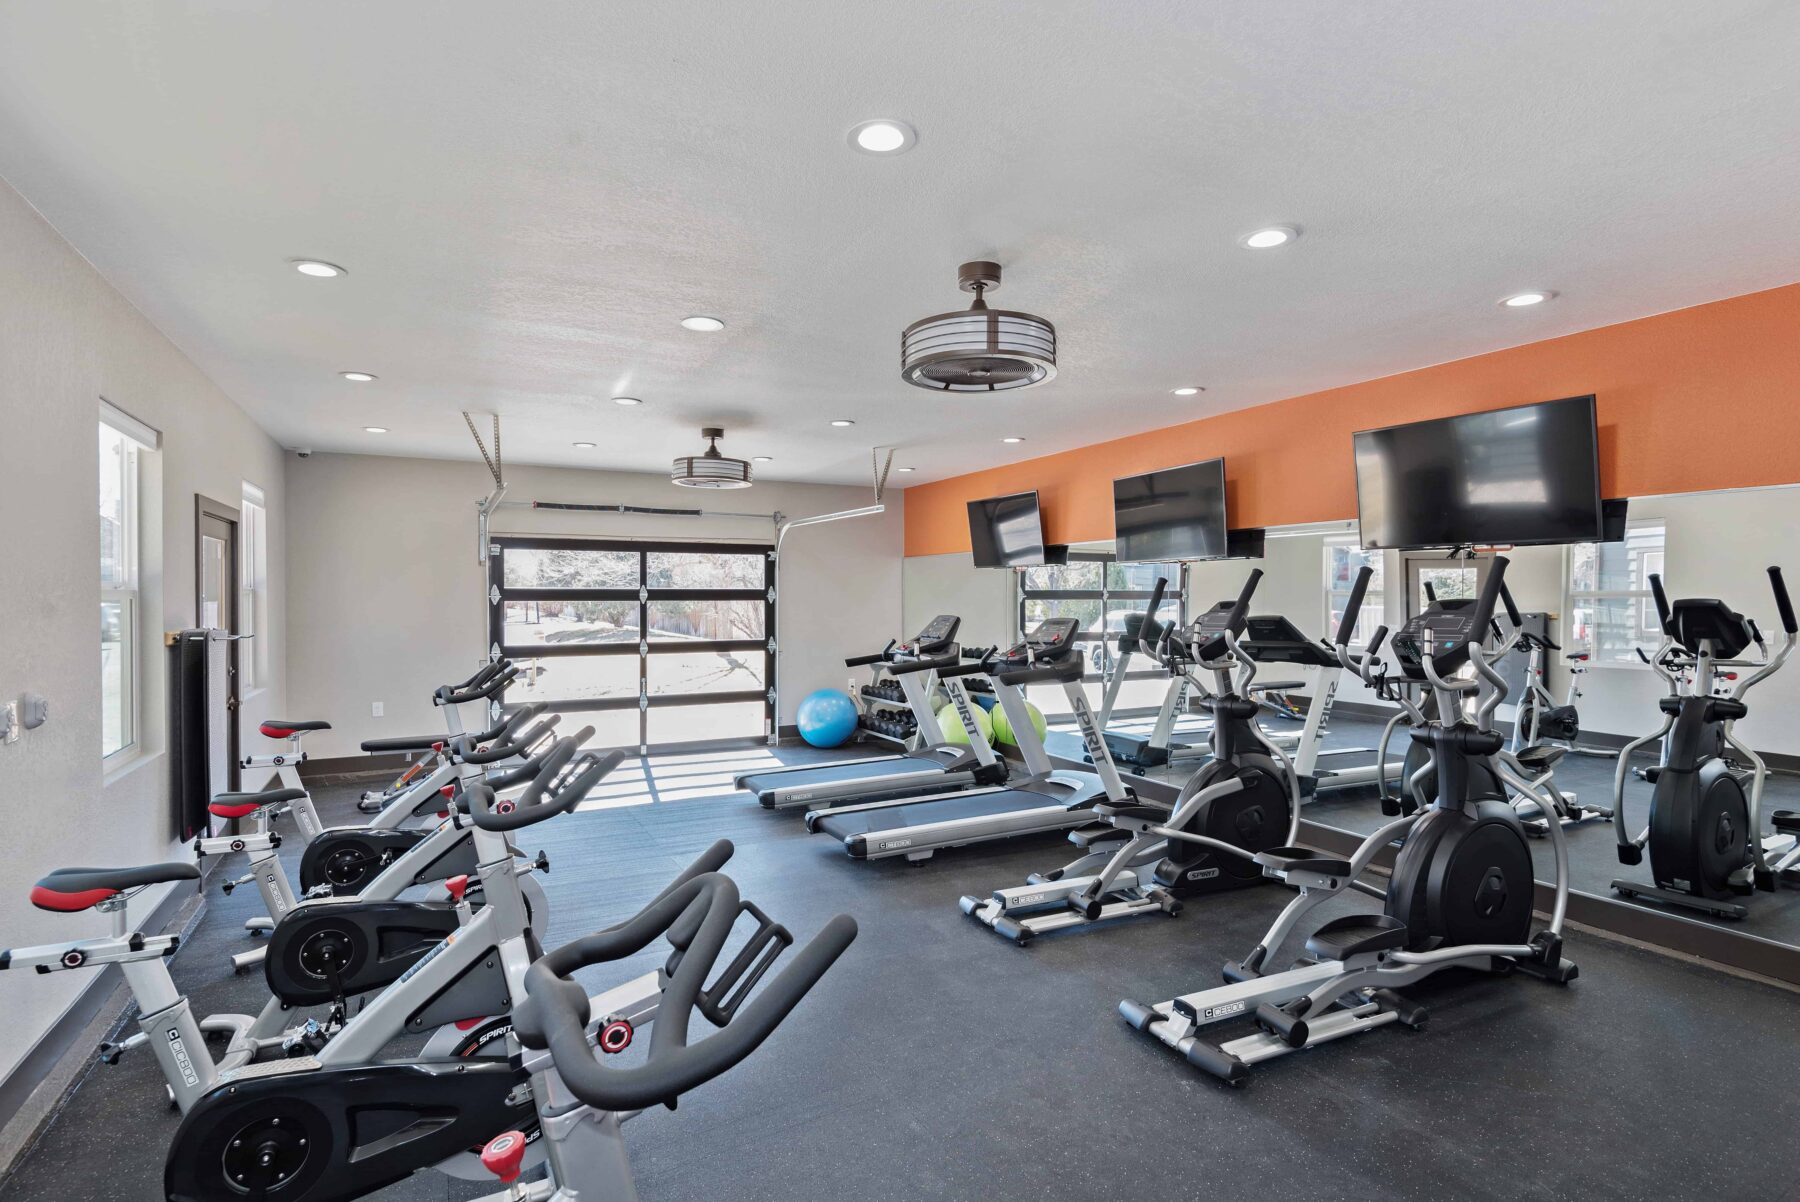 Fitness center with weights & modern machines for cardio